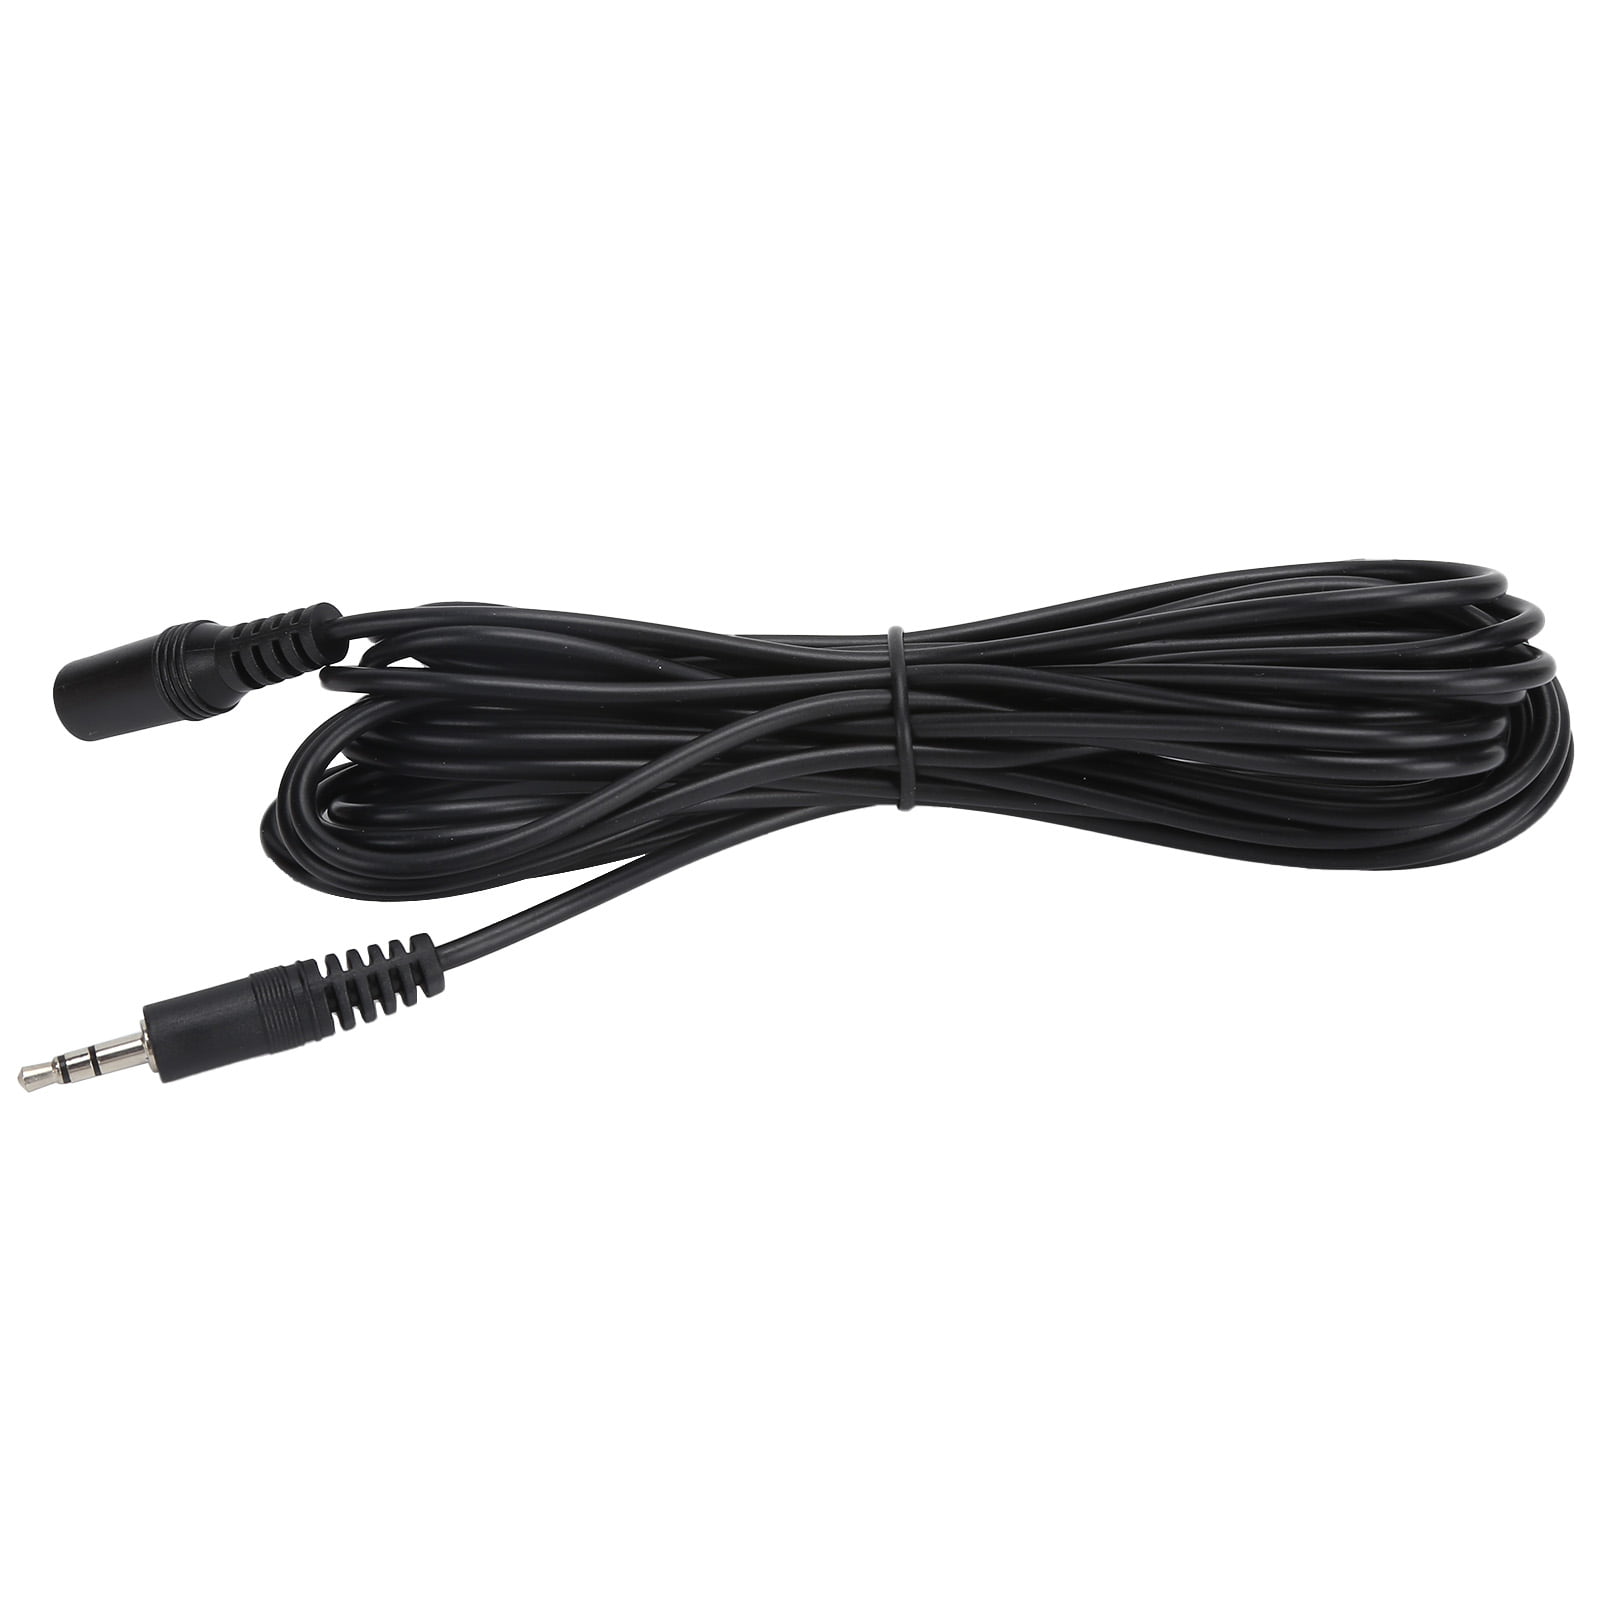 12ft long 1/8" MONO Male-Female Extension,3.5mm,Audio Cable/Cord/Wire 2conductor 